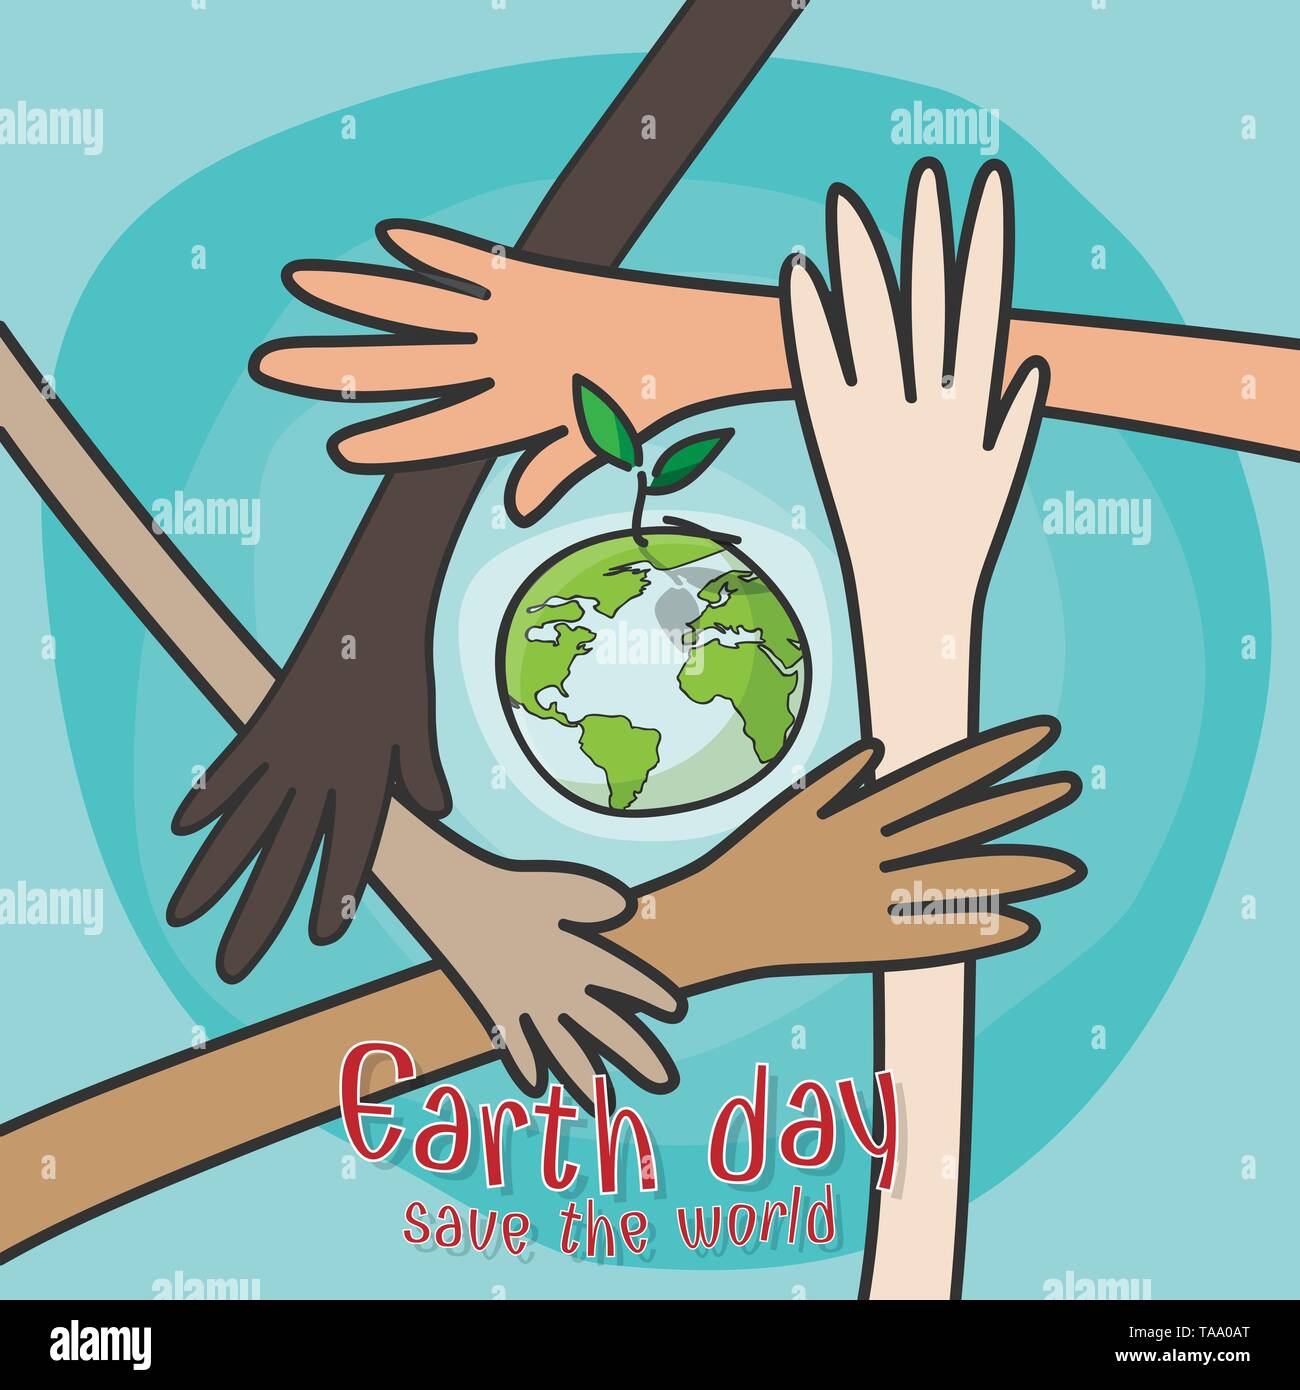 Environment day children Stock Vector Images - Alamy